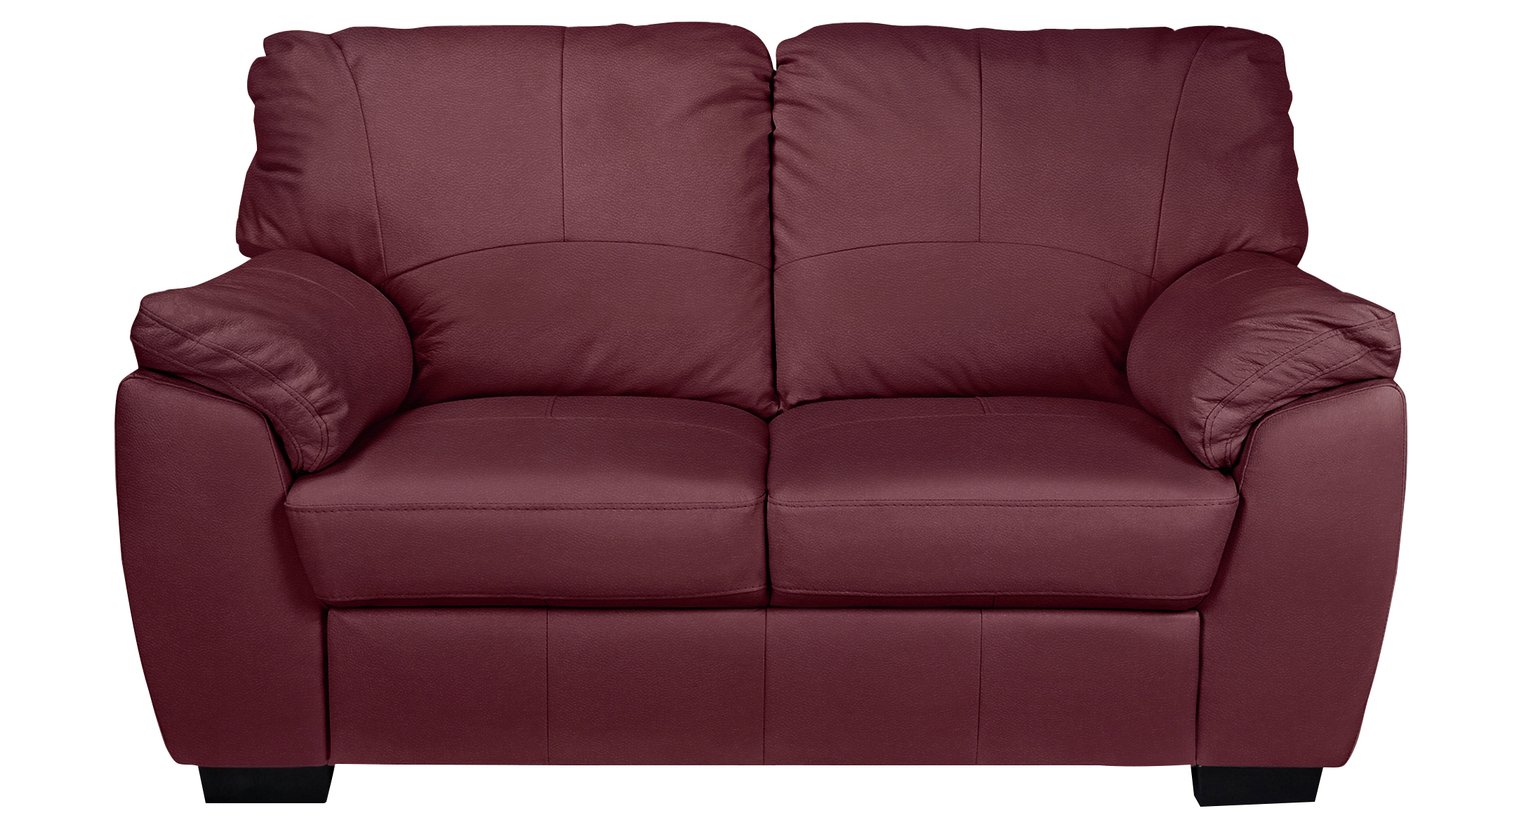 Argos Home Milano Pair of Leather 2 Seater Sofa - Red